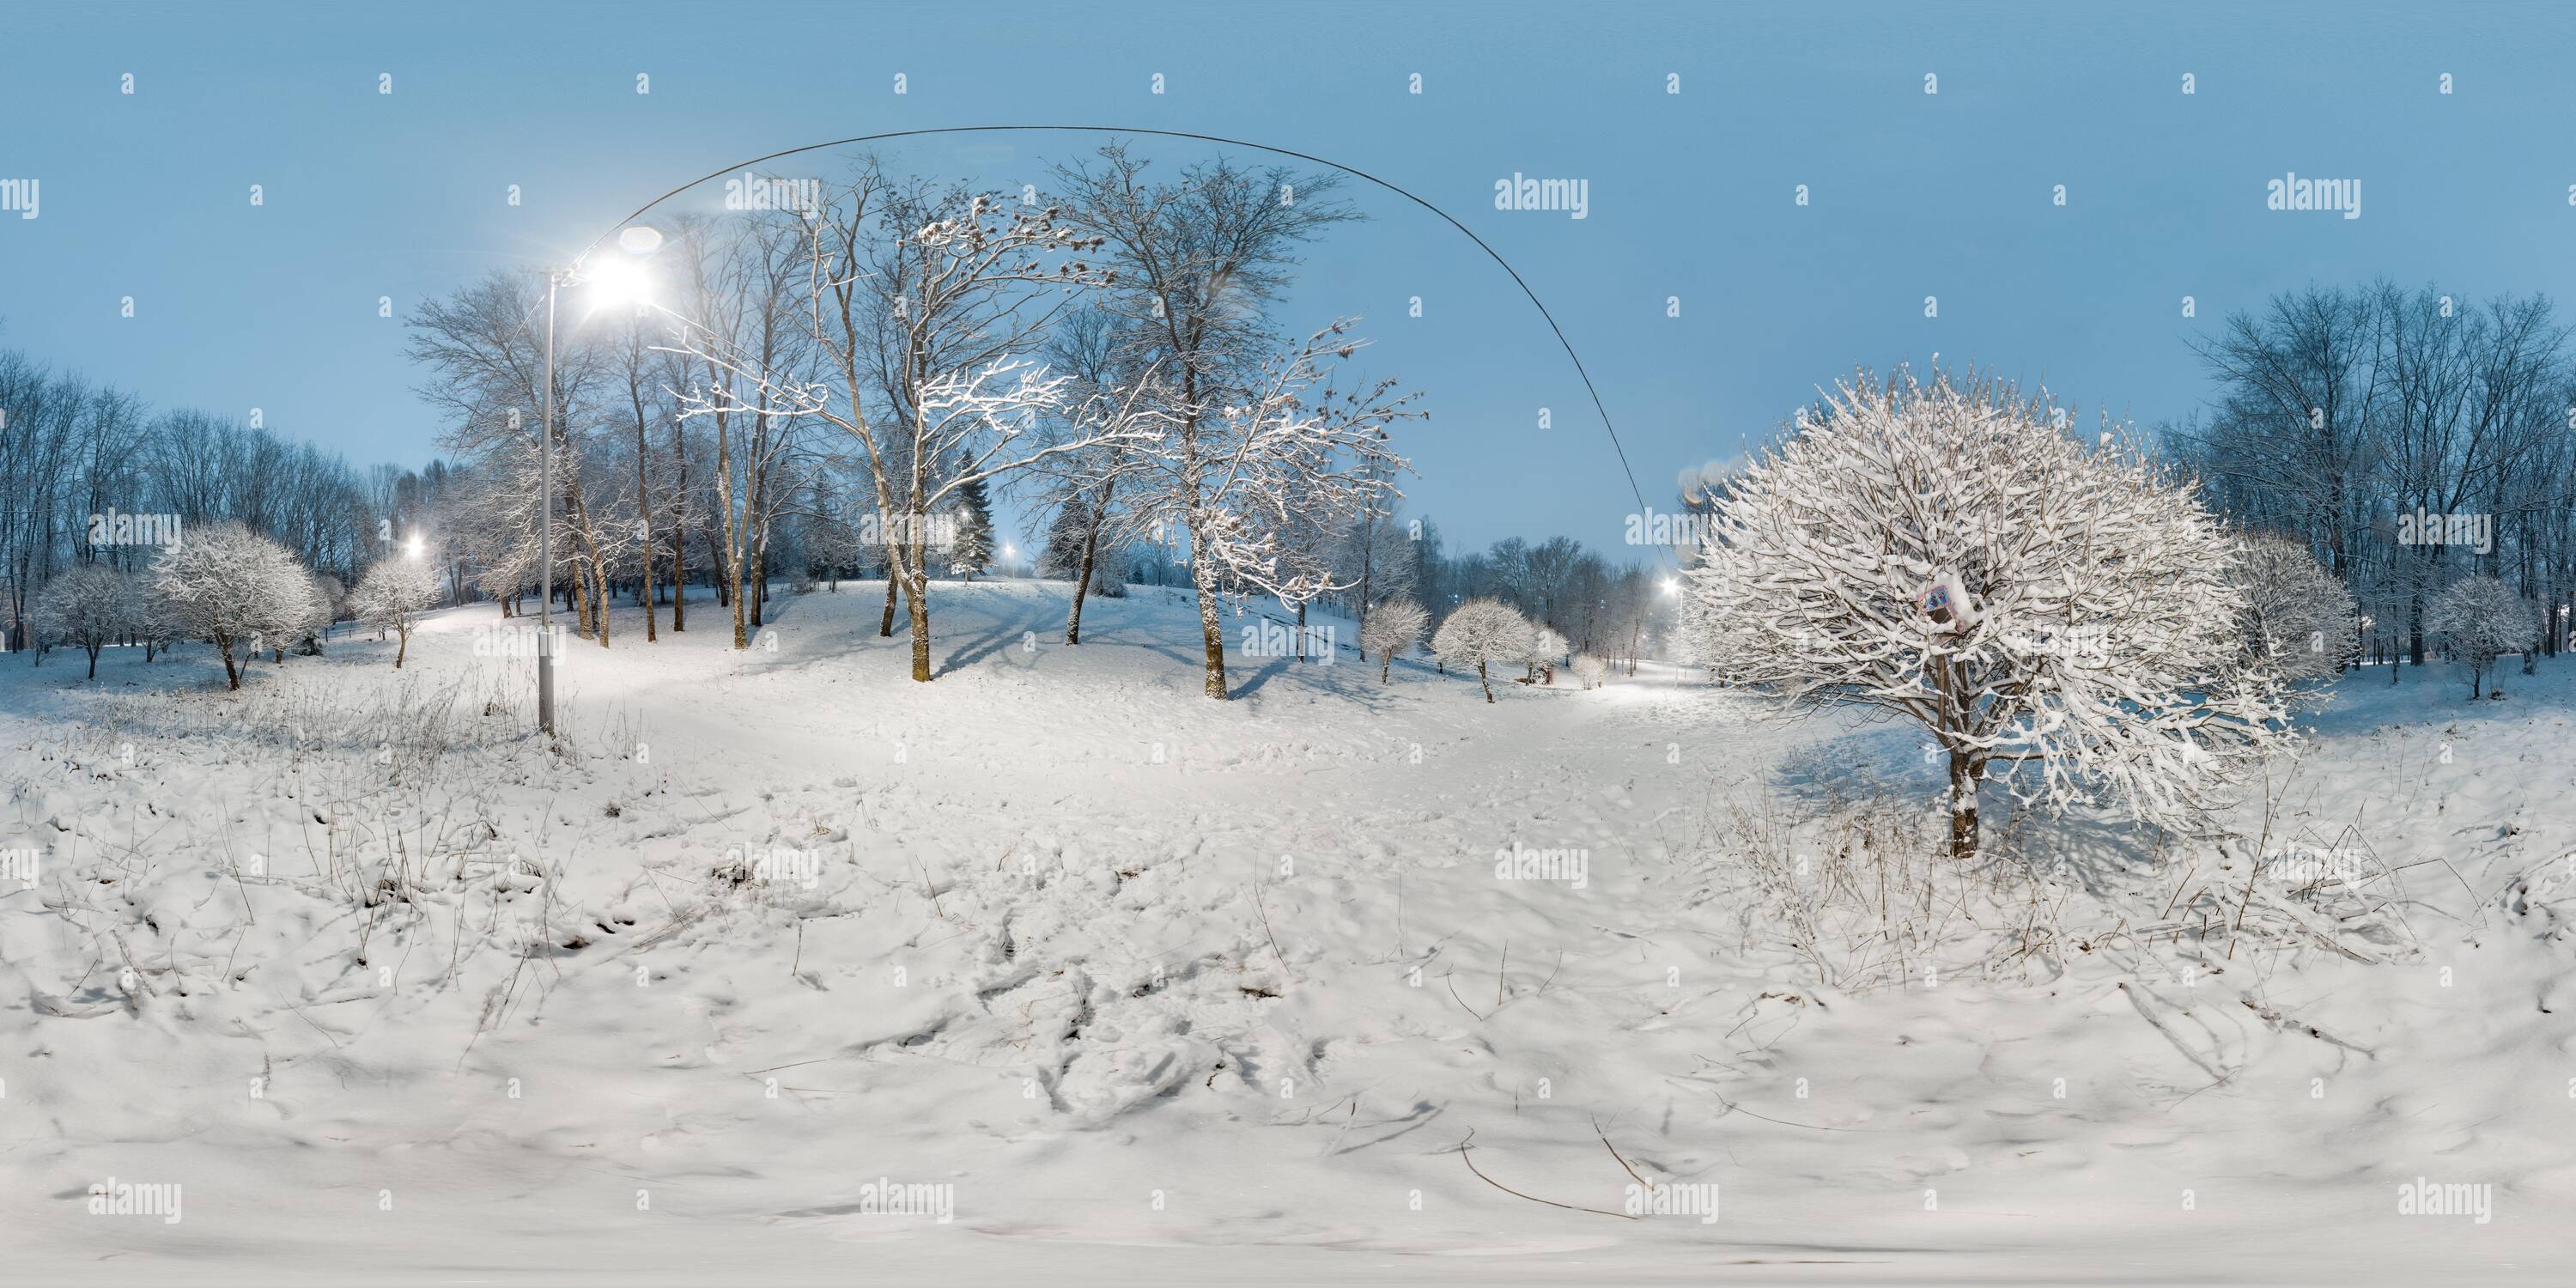 360 degree panoramic view of Image with 3D spherical panorama with 360 degree viewing angle. Snowy winter in park with trees at the evening. Burning lanterns. Full equirectangular